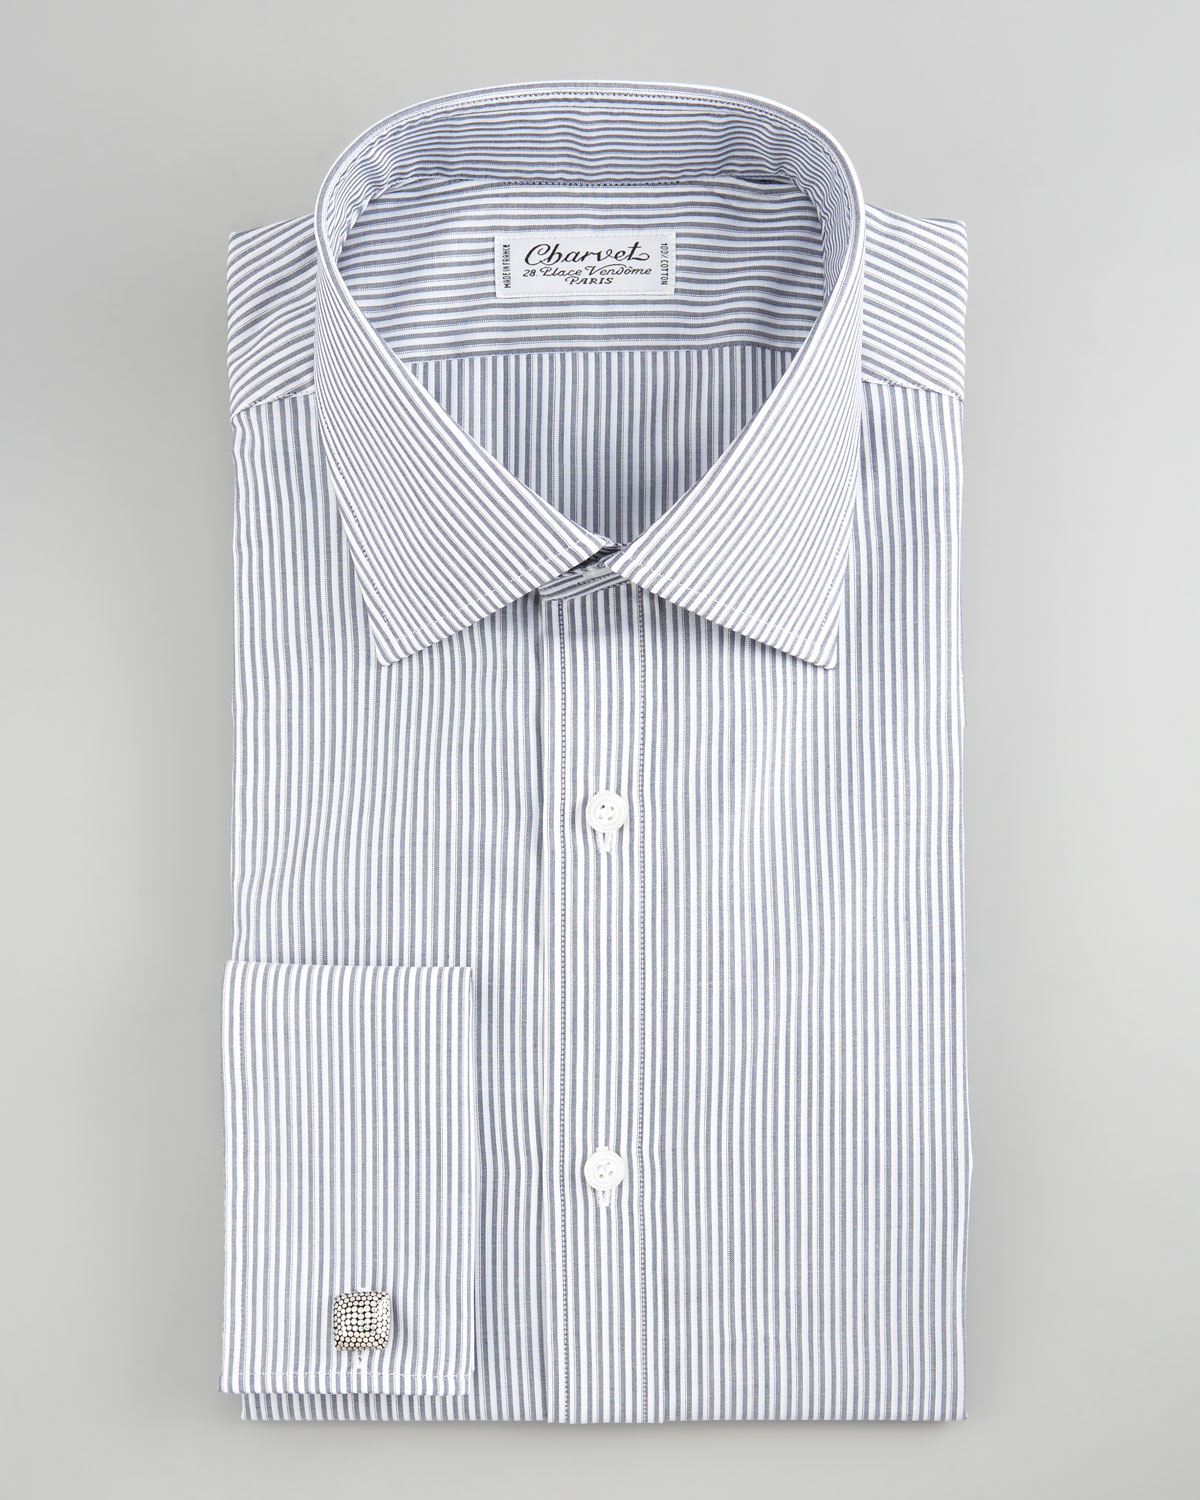 Charvet Striped French Cuff Dress Shirt in Gray for Men | Lyst